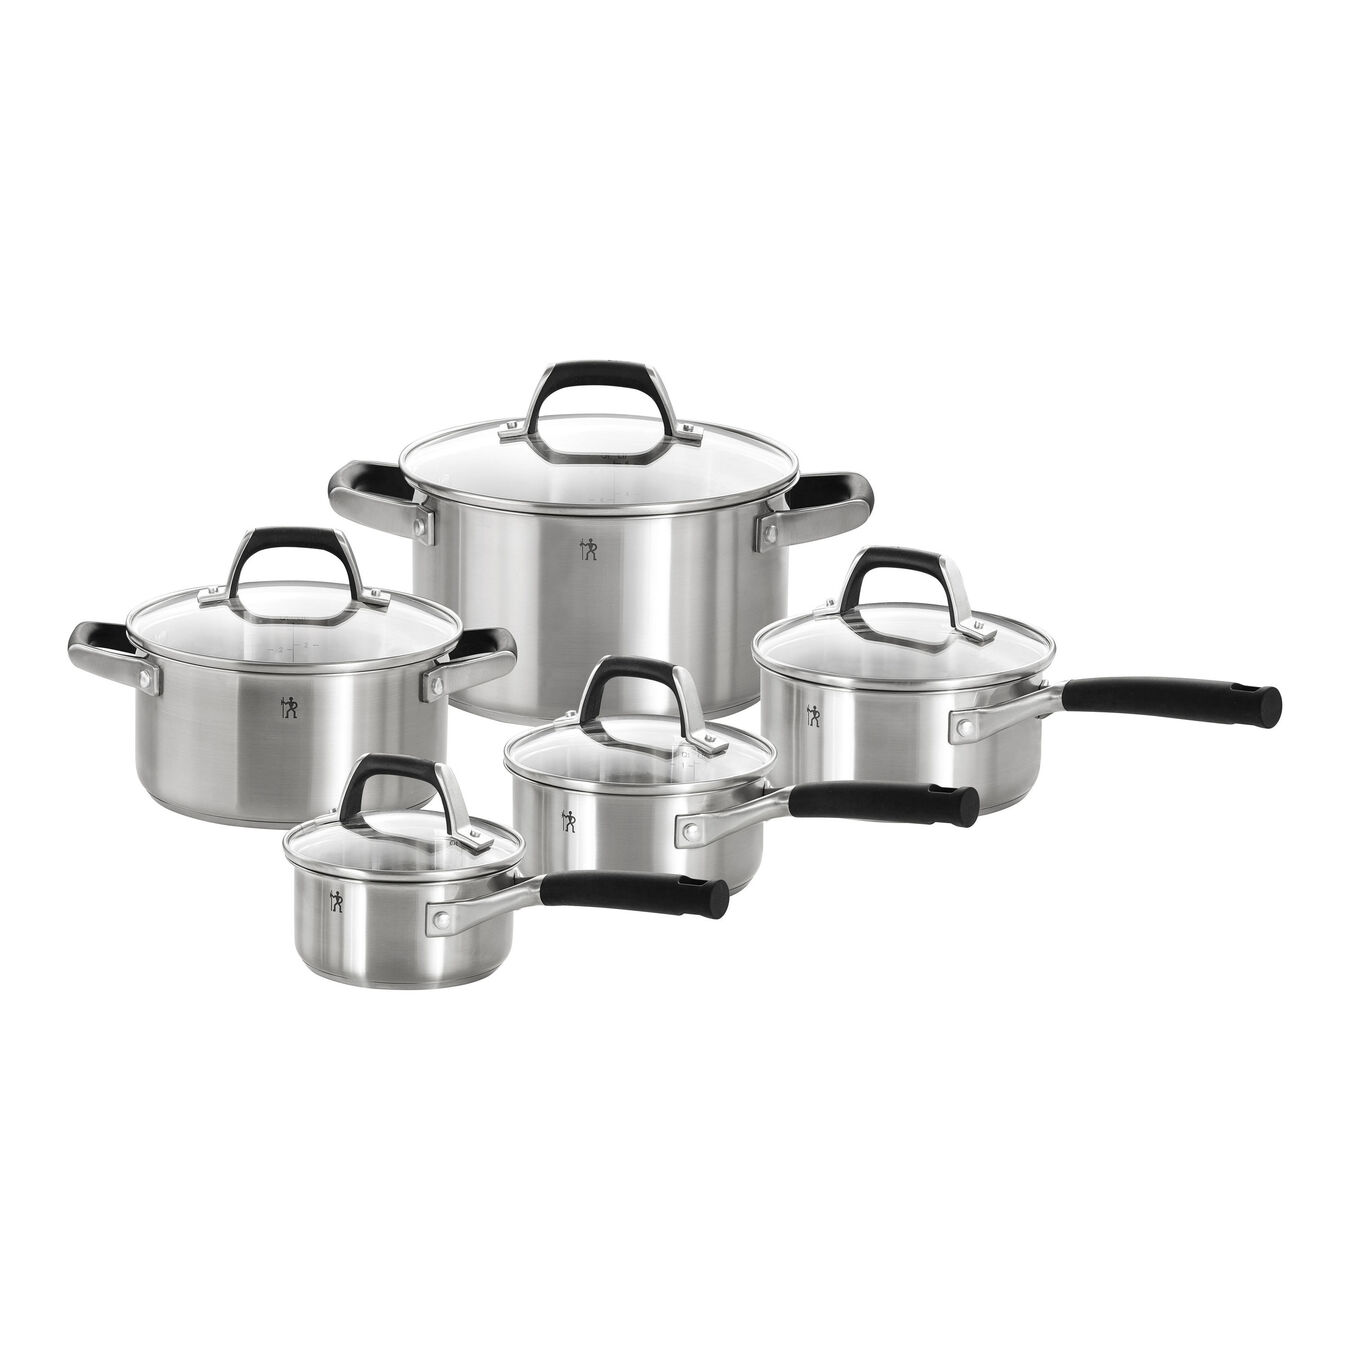 10 Piece 18/10 Stainless Steel Cookware set,,large 1